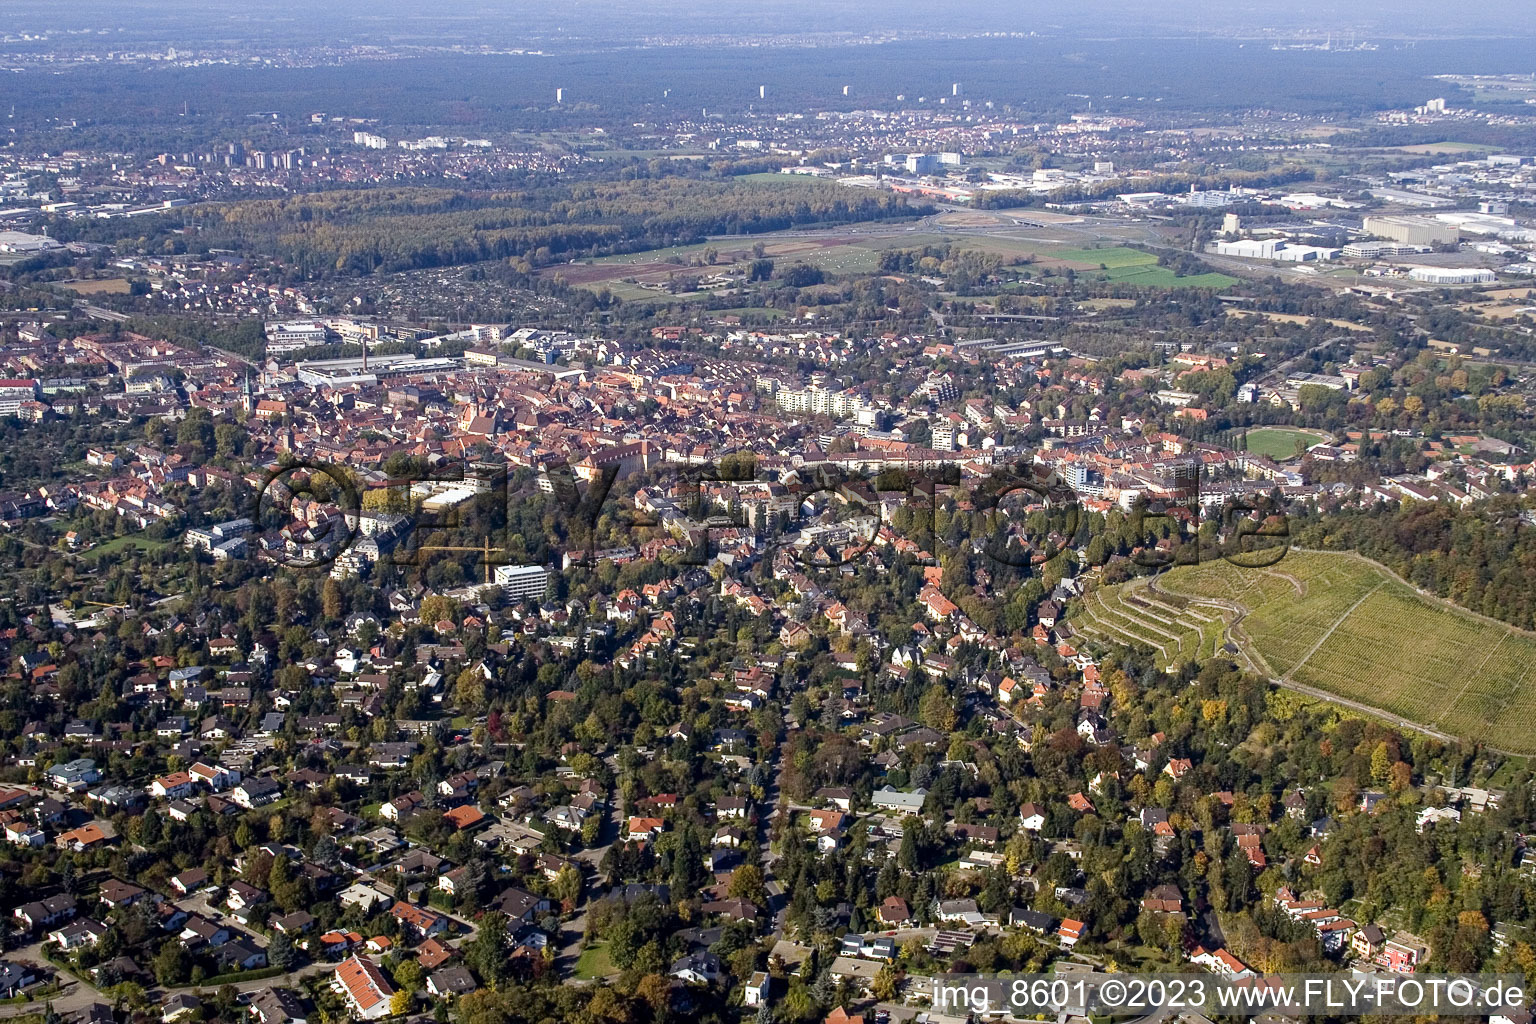 From the southeast in the district Durlach in Karlsruhe in the state Baden-Wuerttemberg, Germany